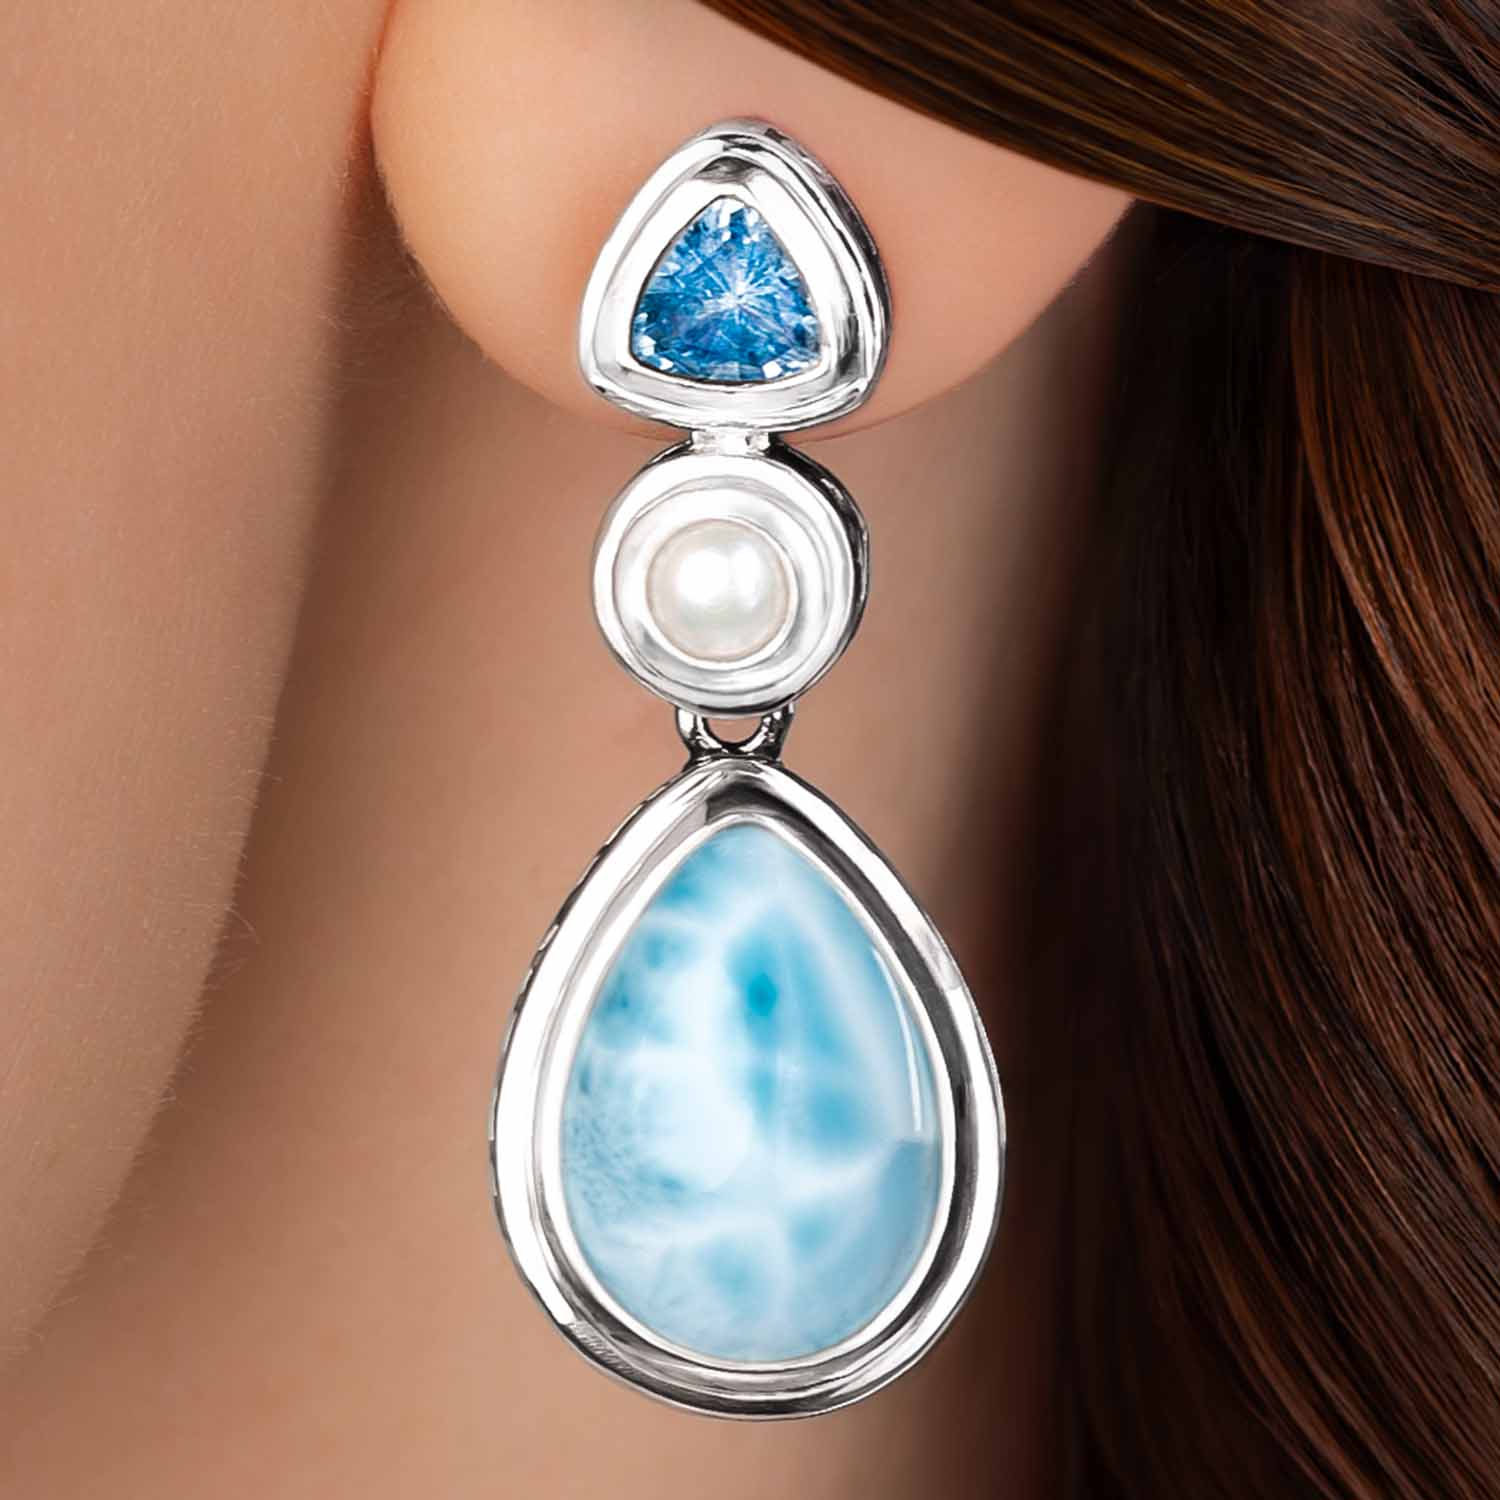 Vintage Earrings in sterling silver and larimar by marahlago